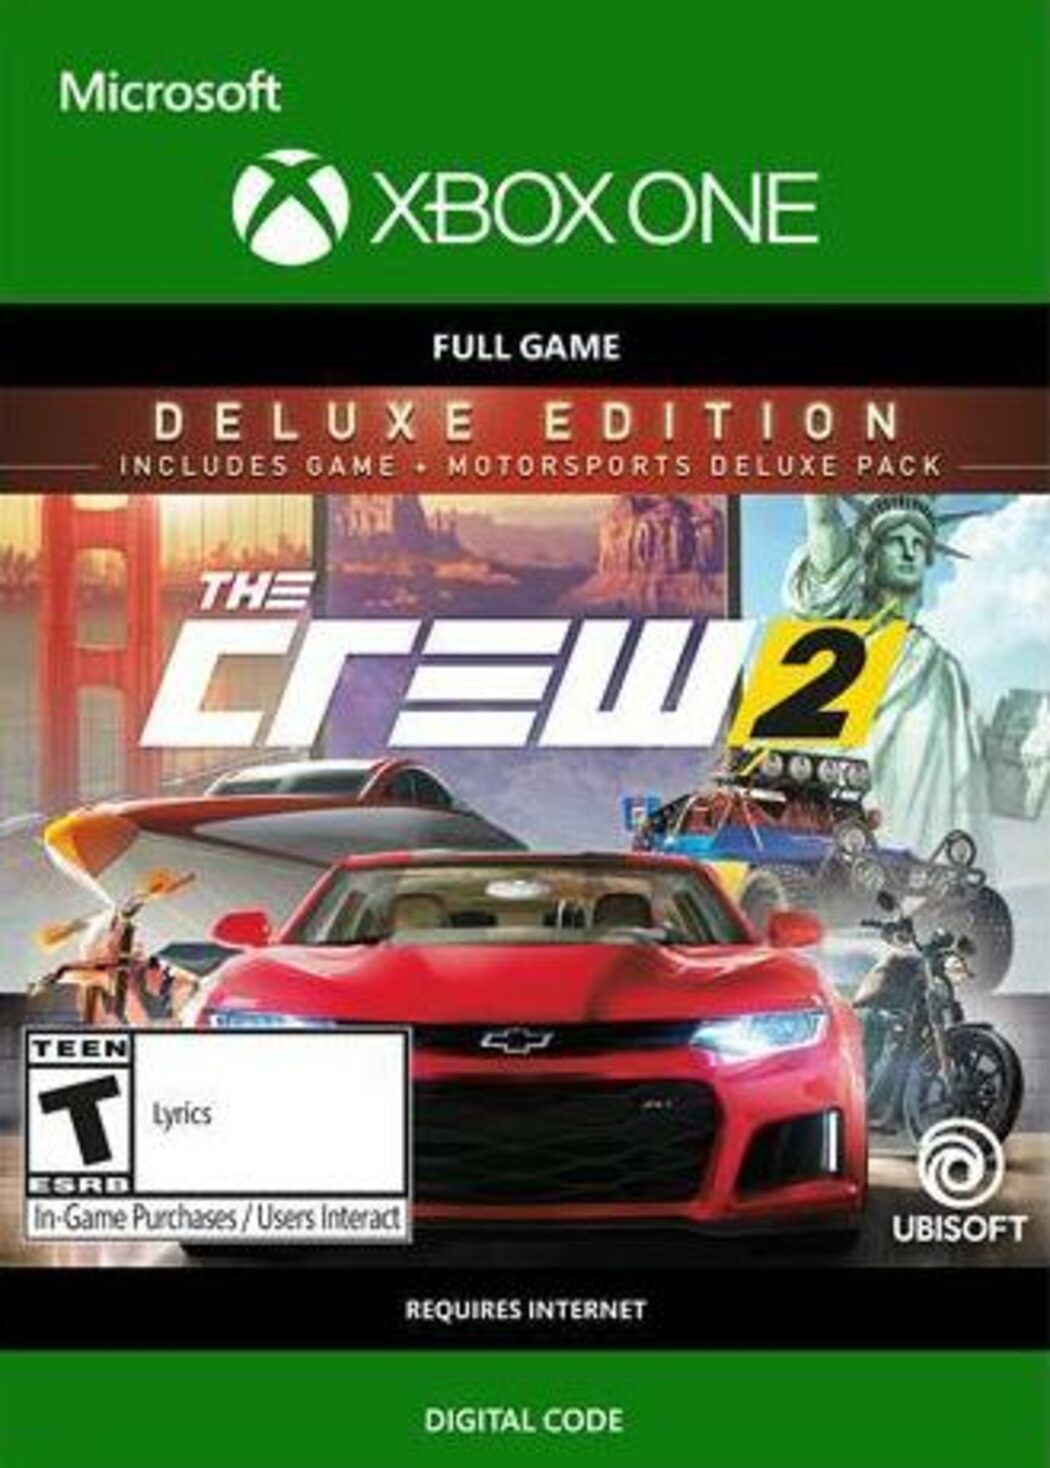 The Crew 2 Gold Edition 2.0 | Xbox One/Series X|S - Download Code